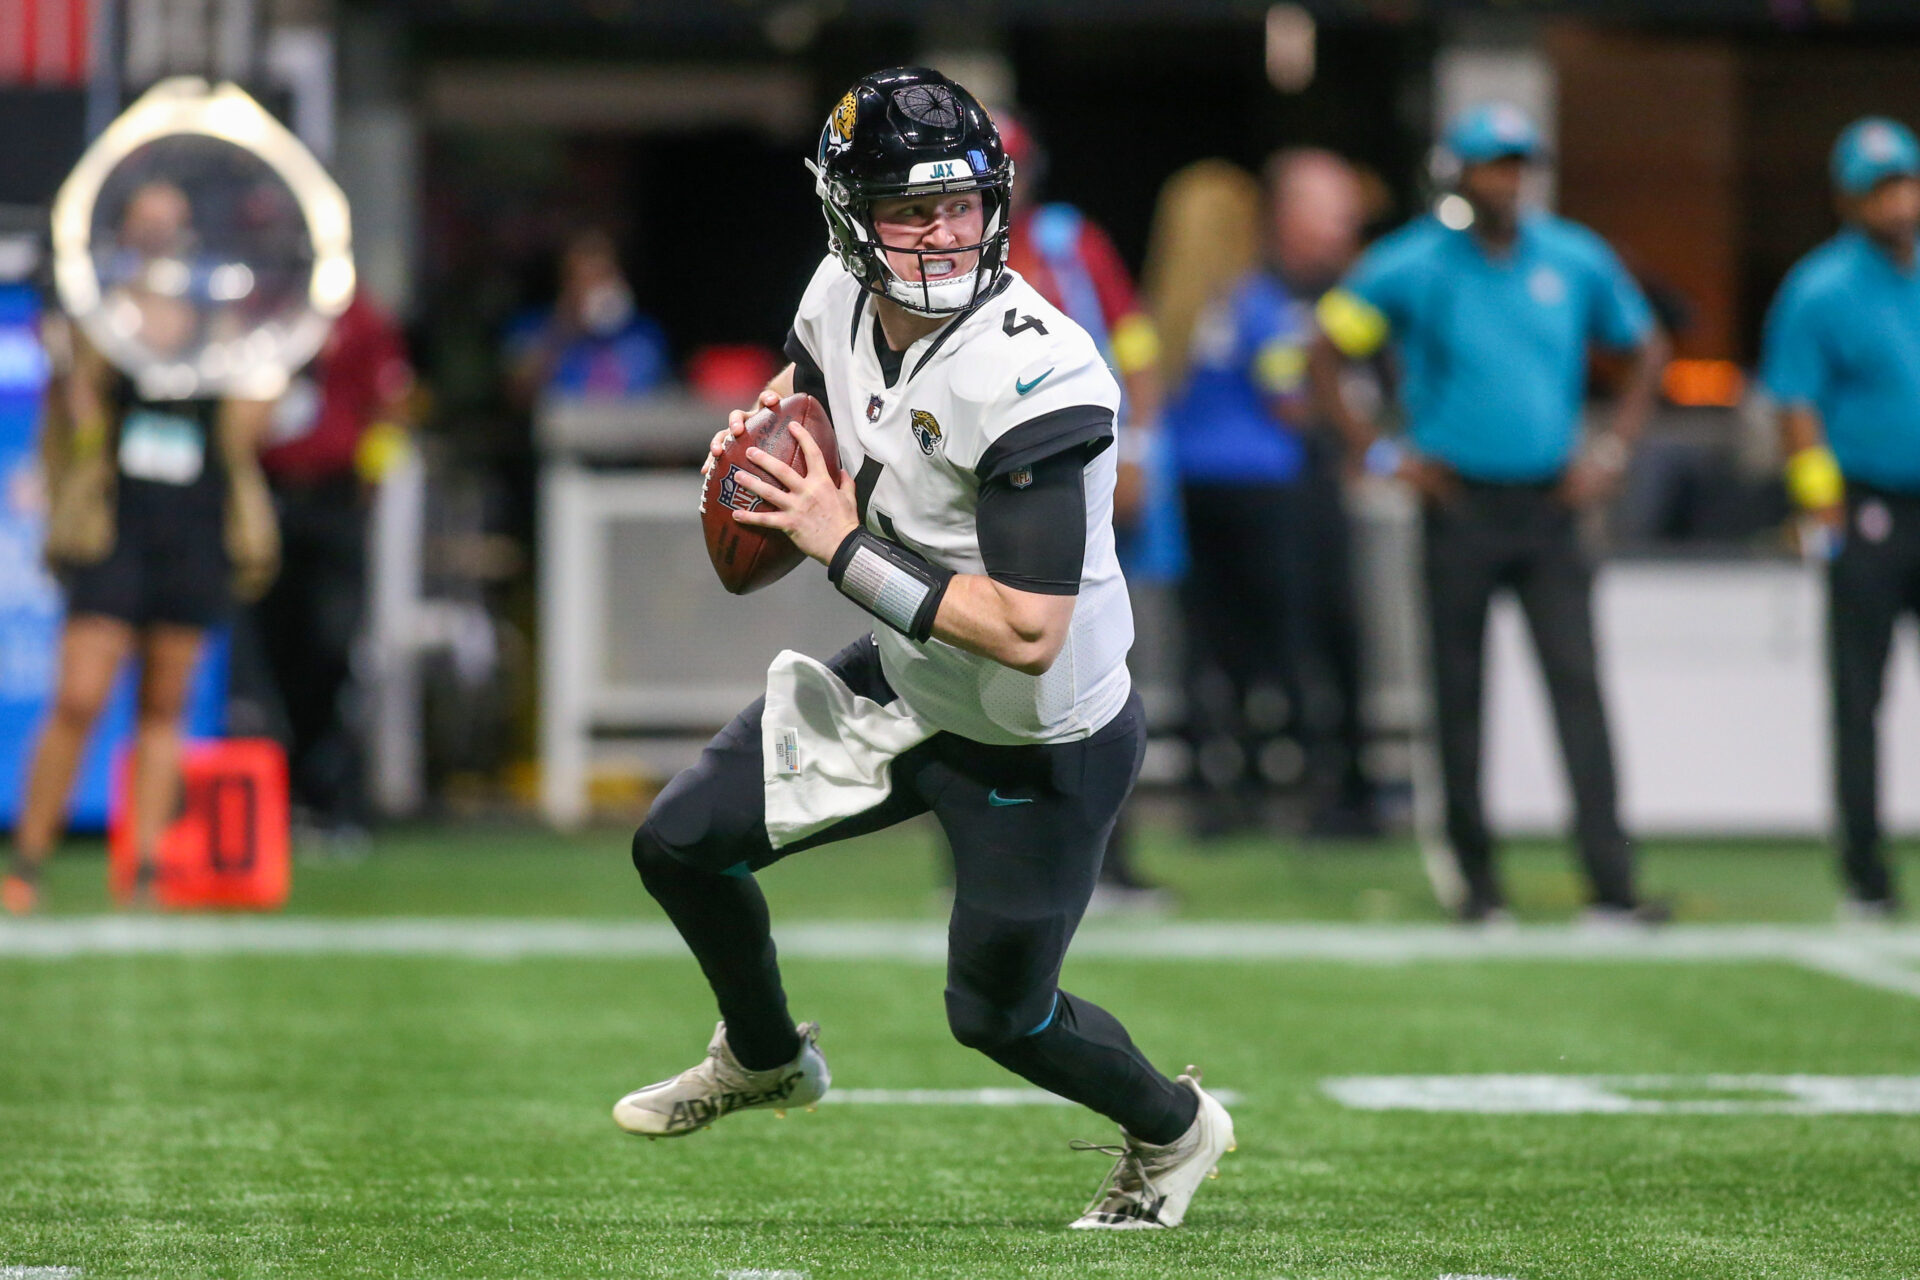 Jacksonville Jaguars quarterback E.J. Perry (4) against the Atlanta Falcons in the first half at Mercedes-Benz Stadium.